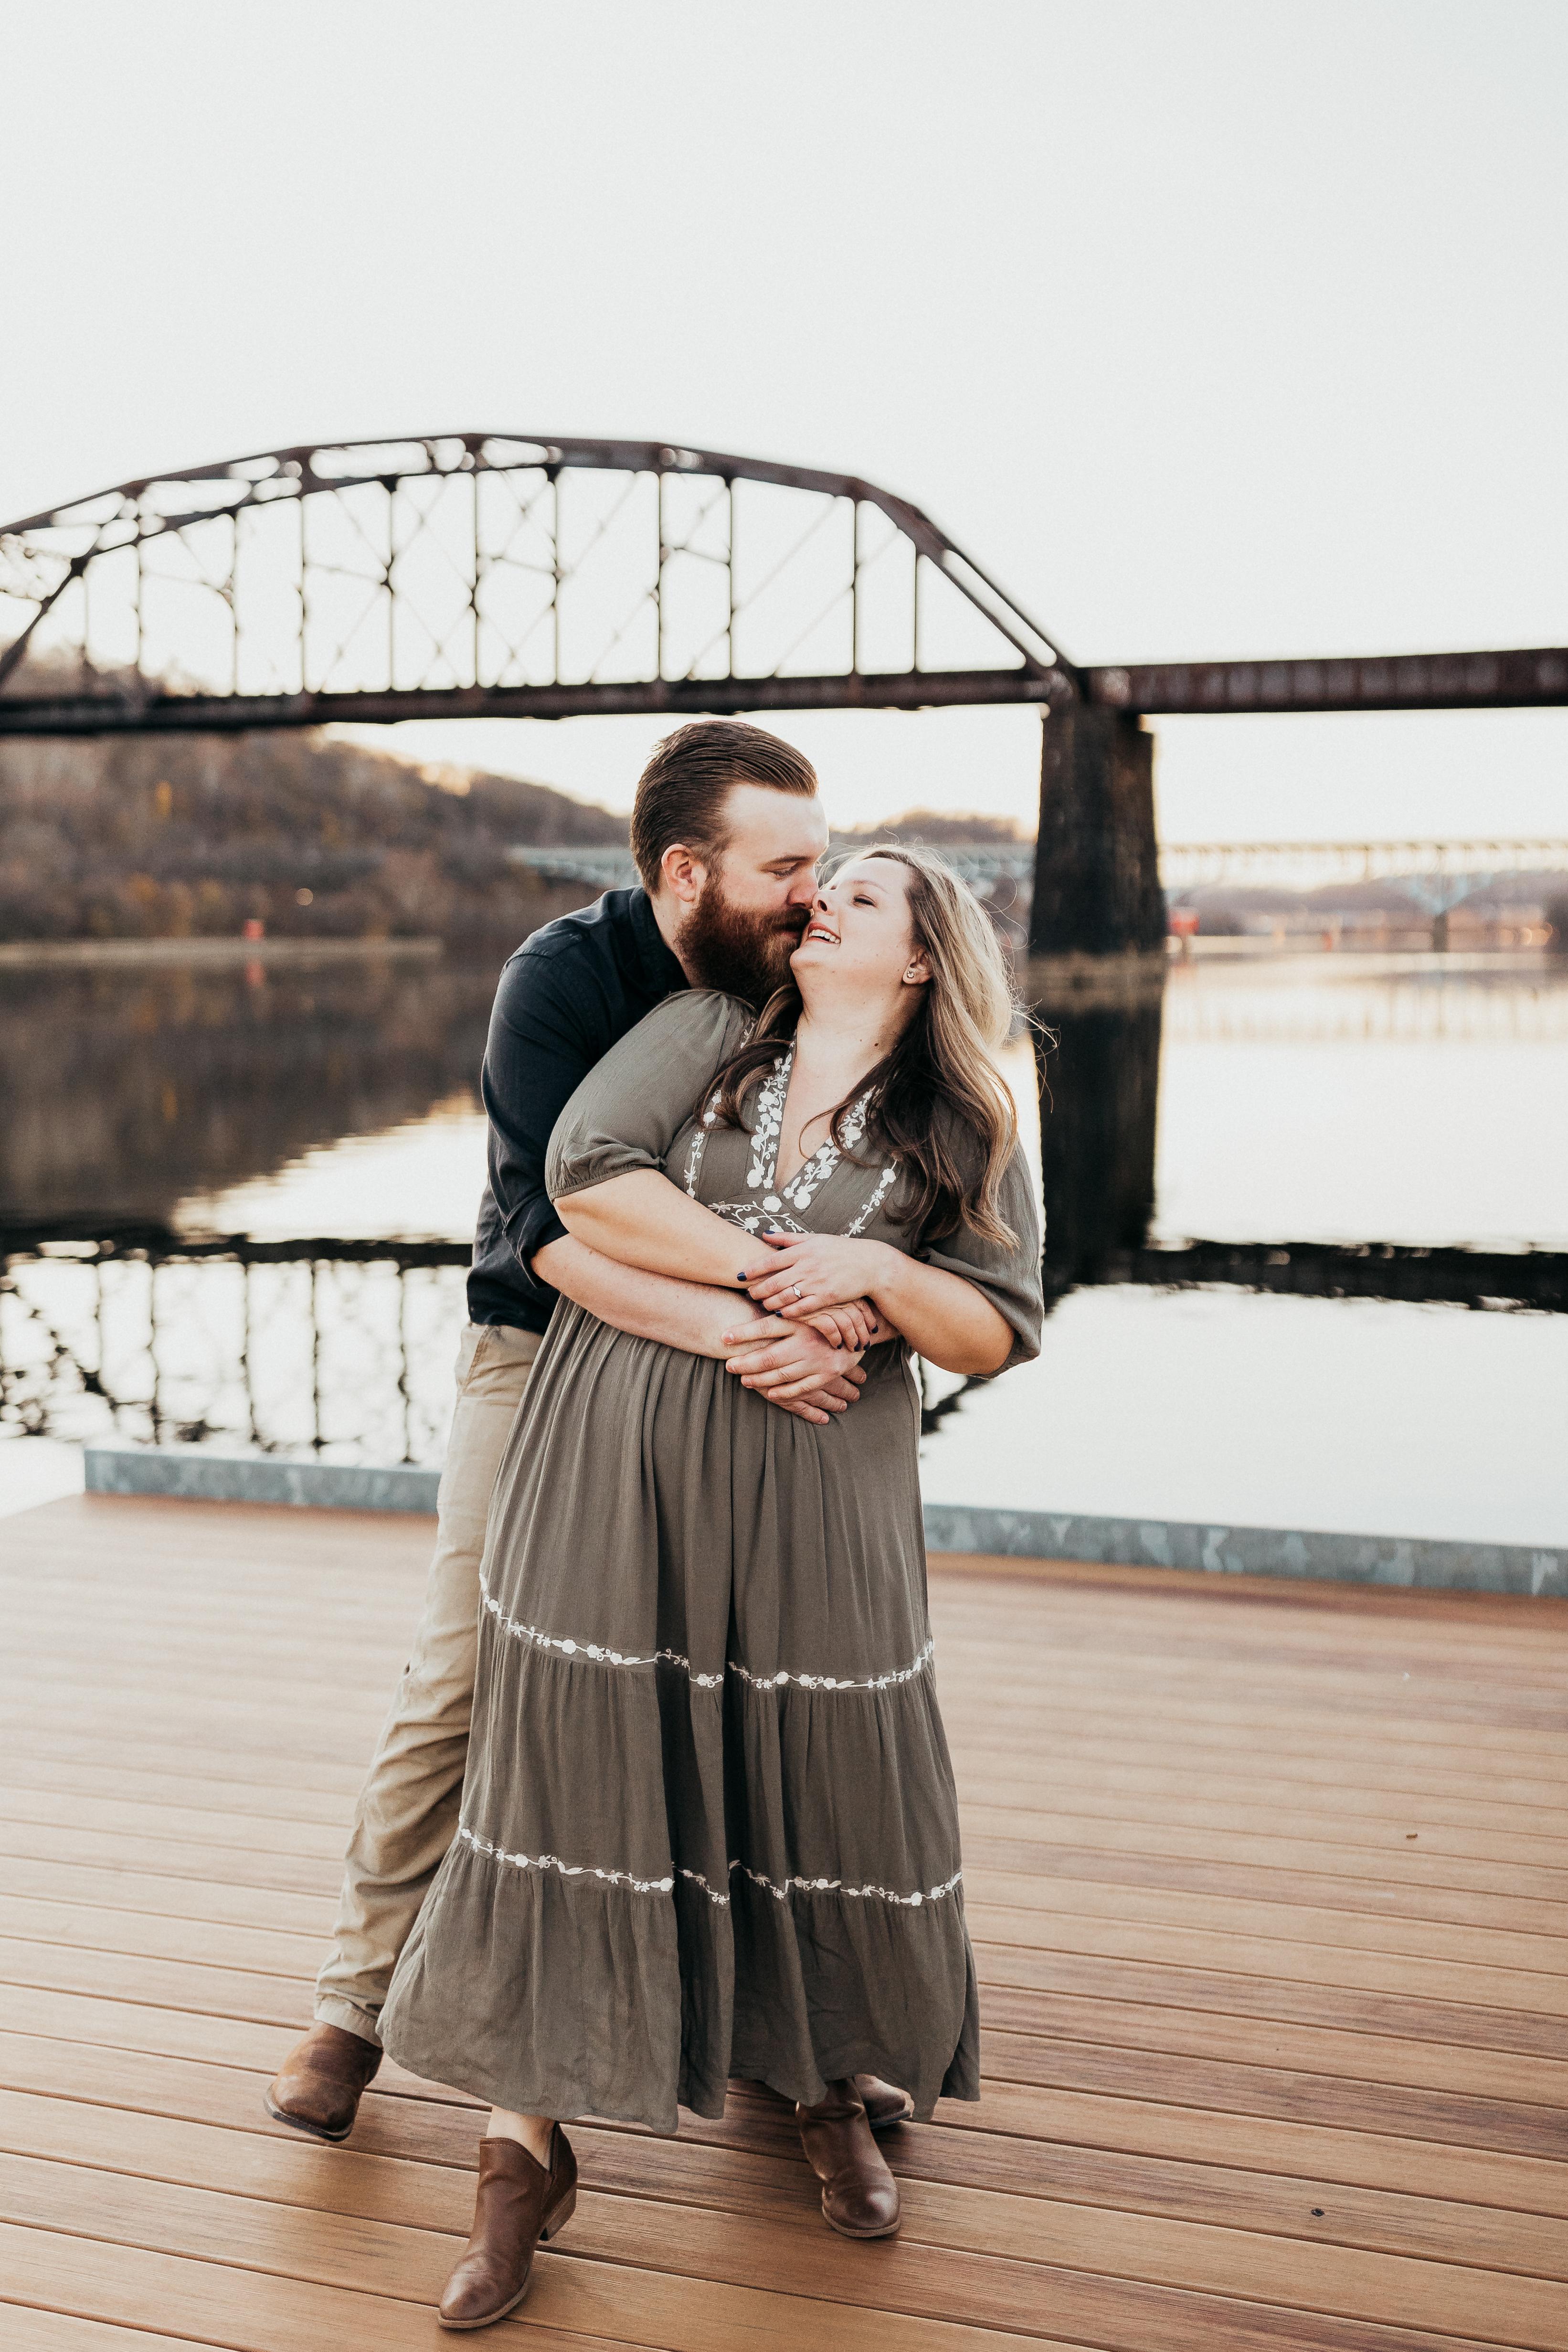 The Wedding Website of Carly Sandstrom and Stephen Pugh